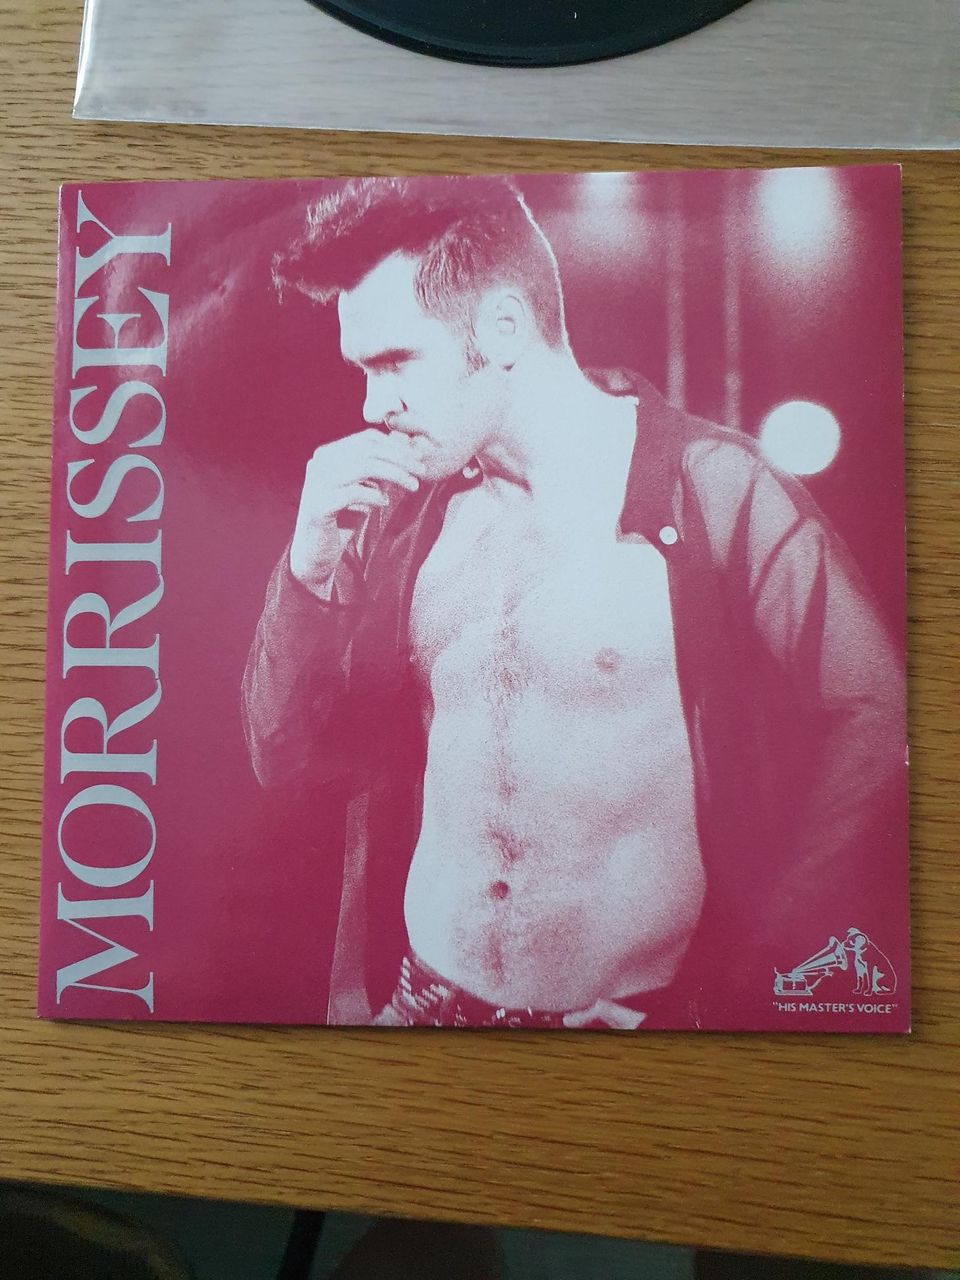 Morrissey, You're the one for..., 7"